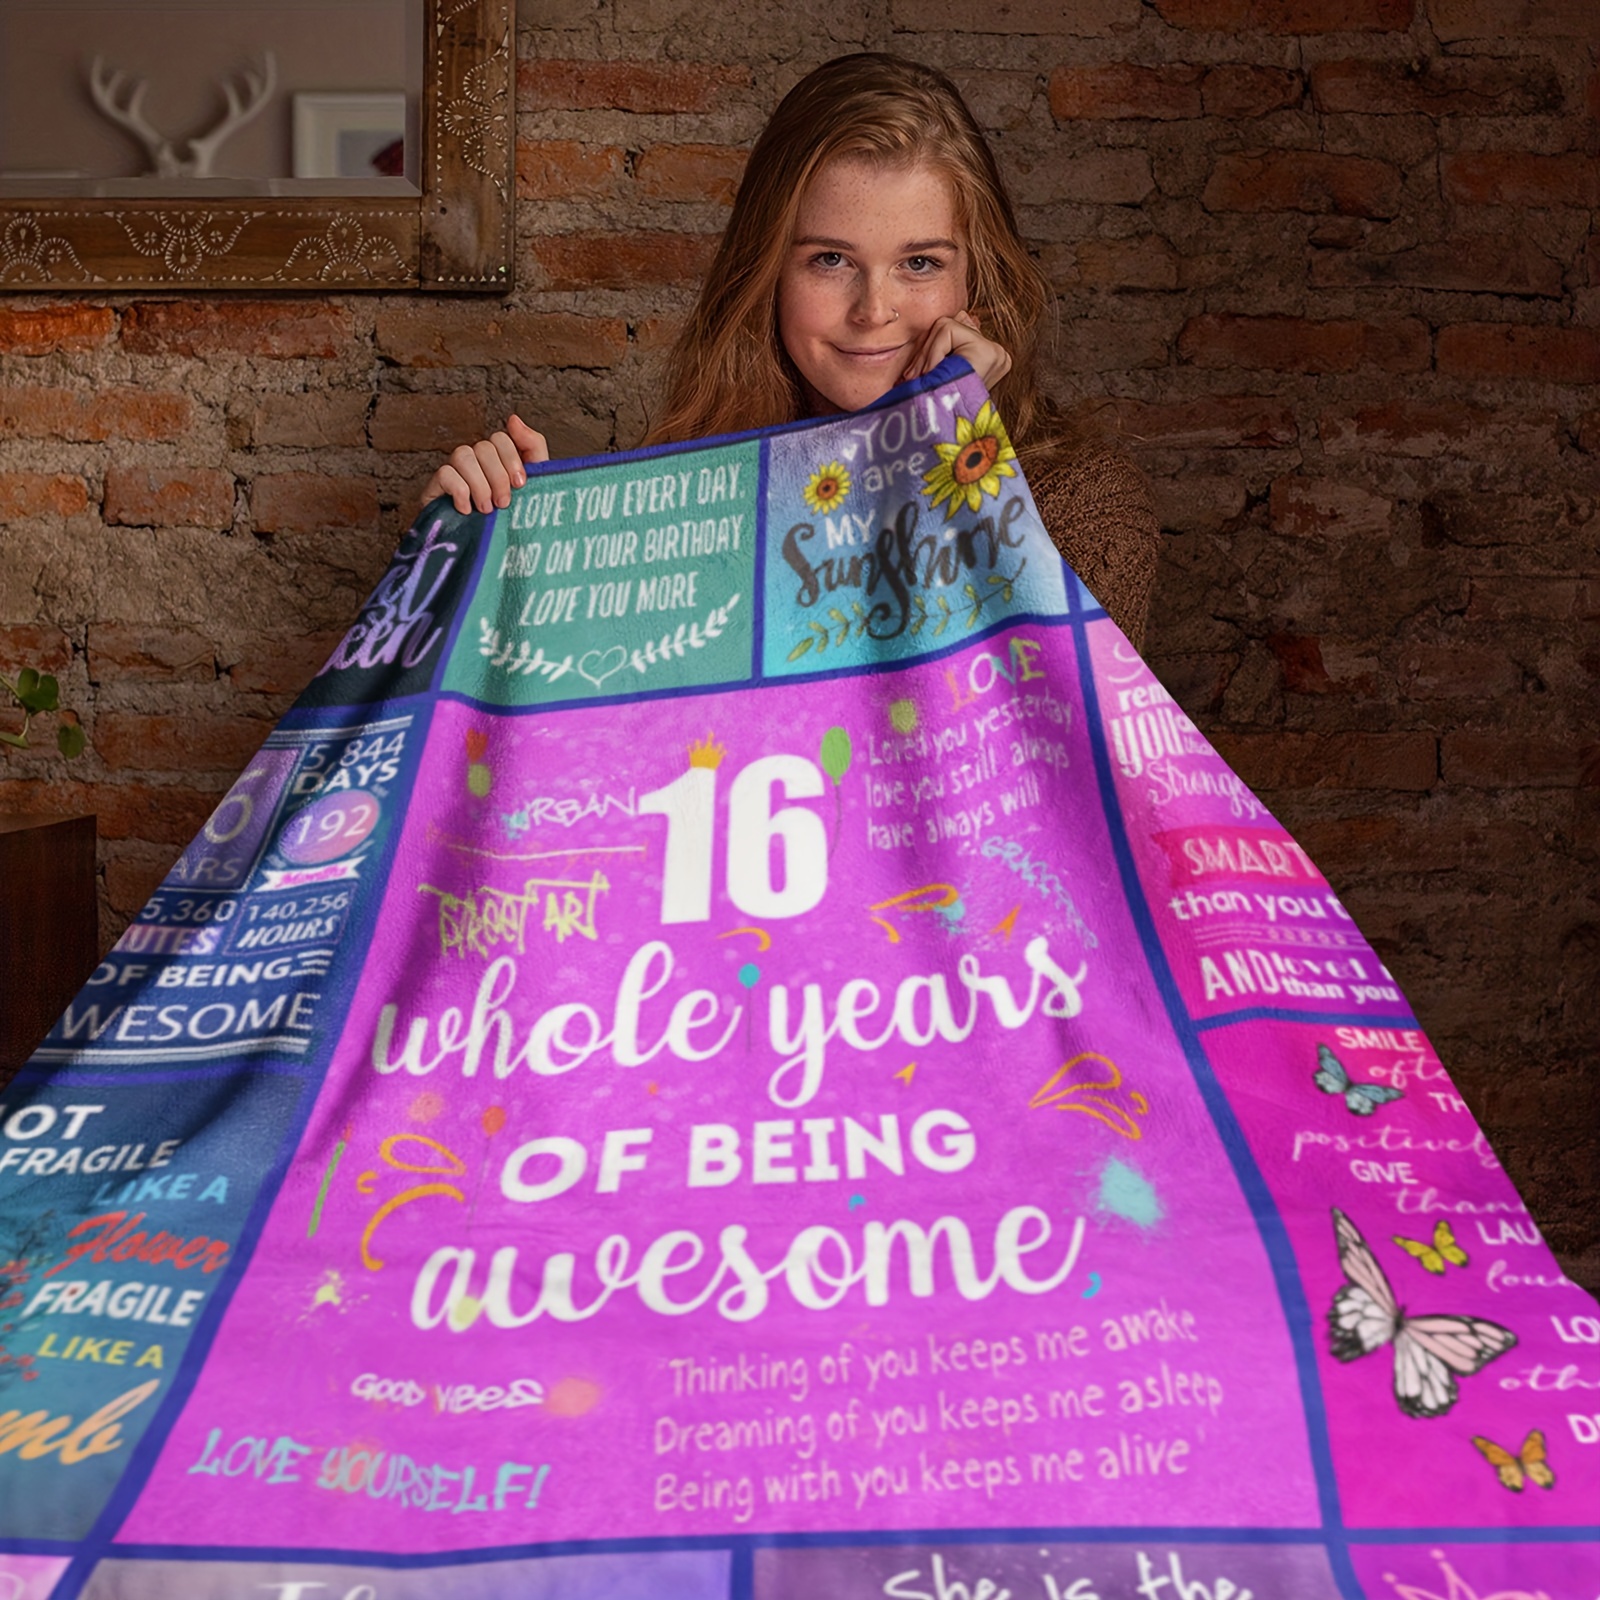 1pc 12 Year Old Girl Gift Ideas Blanket, Gifts For 12 Year Old Girls,  Birthday Gifts For 12 Year Old Girls, 12th Birthday Gifts For Girls, 12th  Birthd